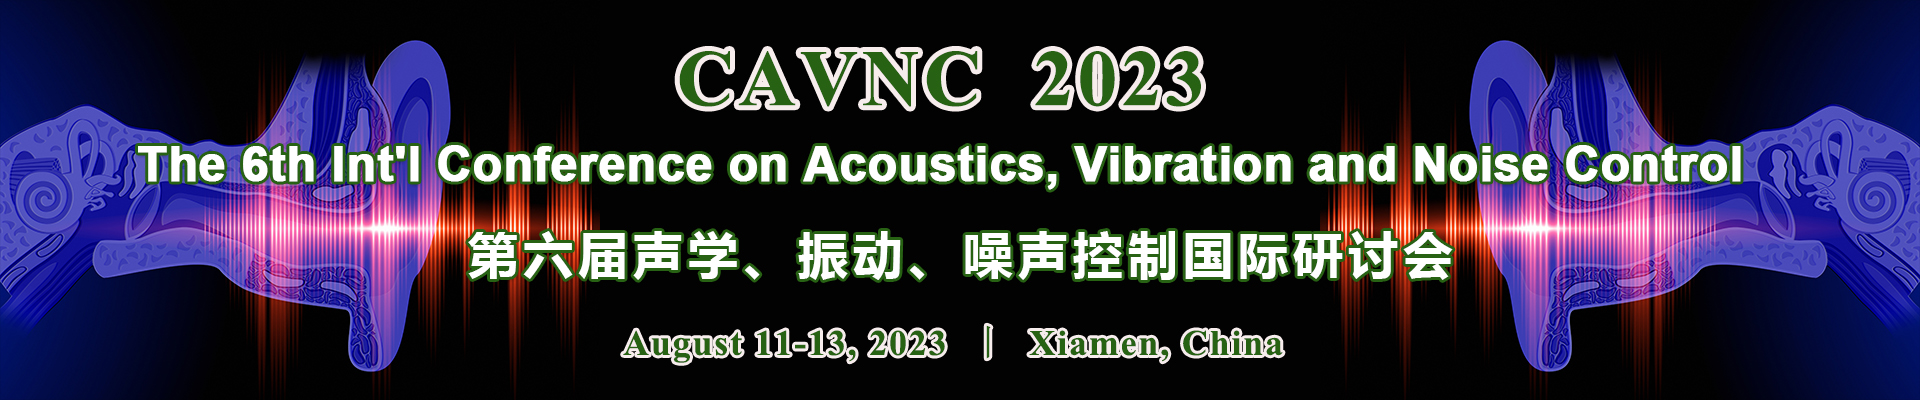 The 6th Int'l Conference on Acoustics, Vibration and Noise Control (CAVNC 2023), Online Event